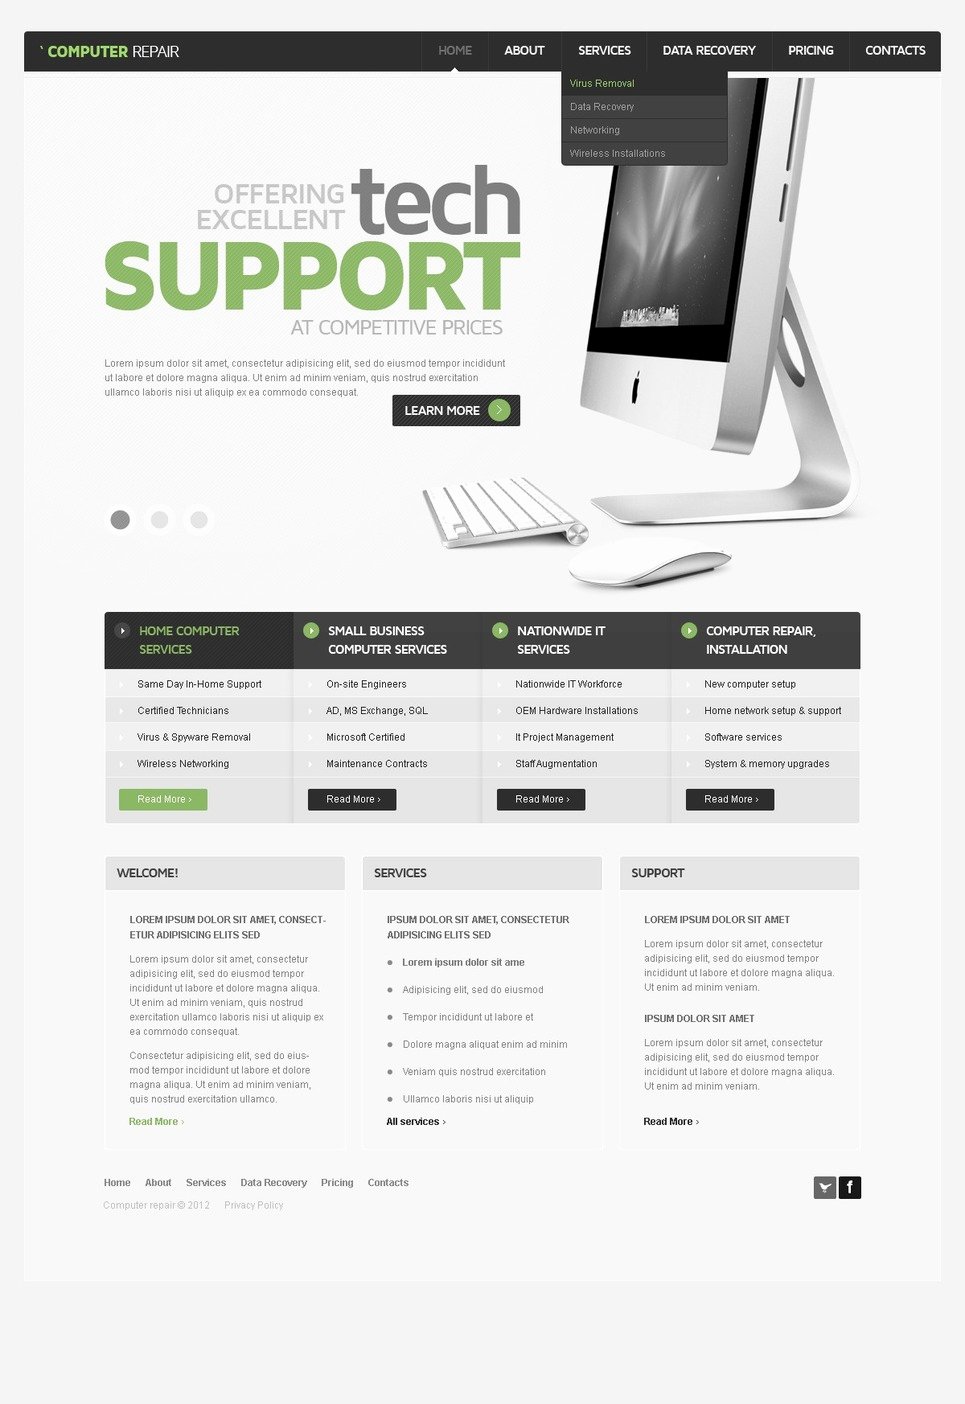 Computer Repairs Website Template Awesome Puter Repair Website Template